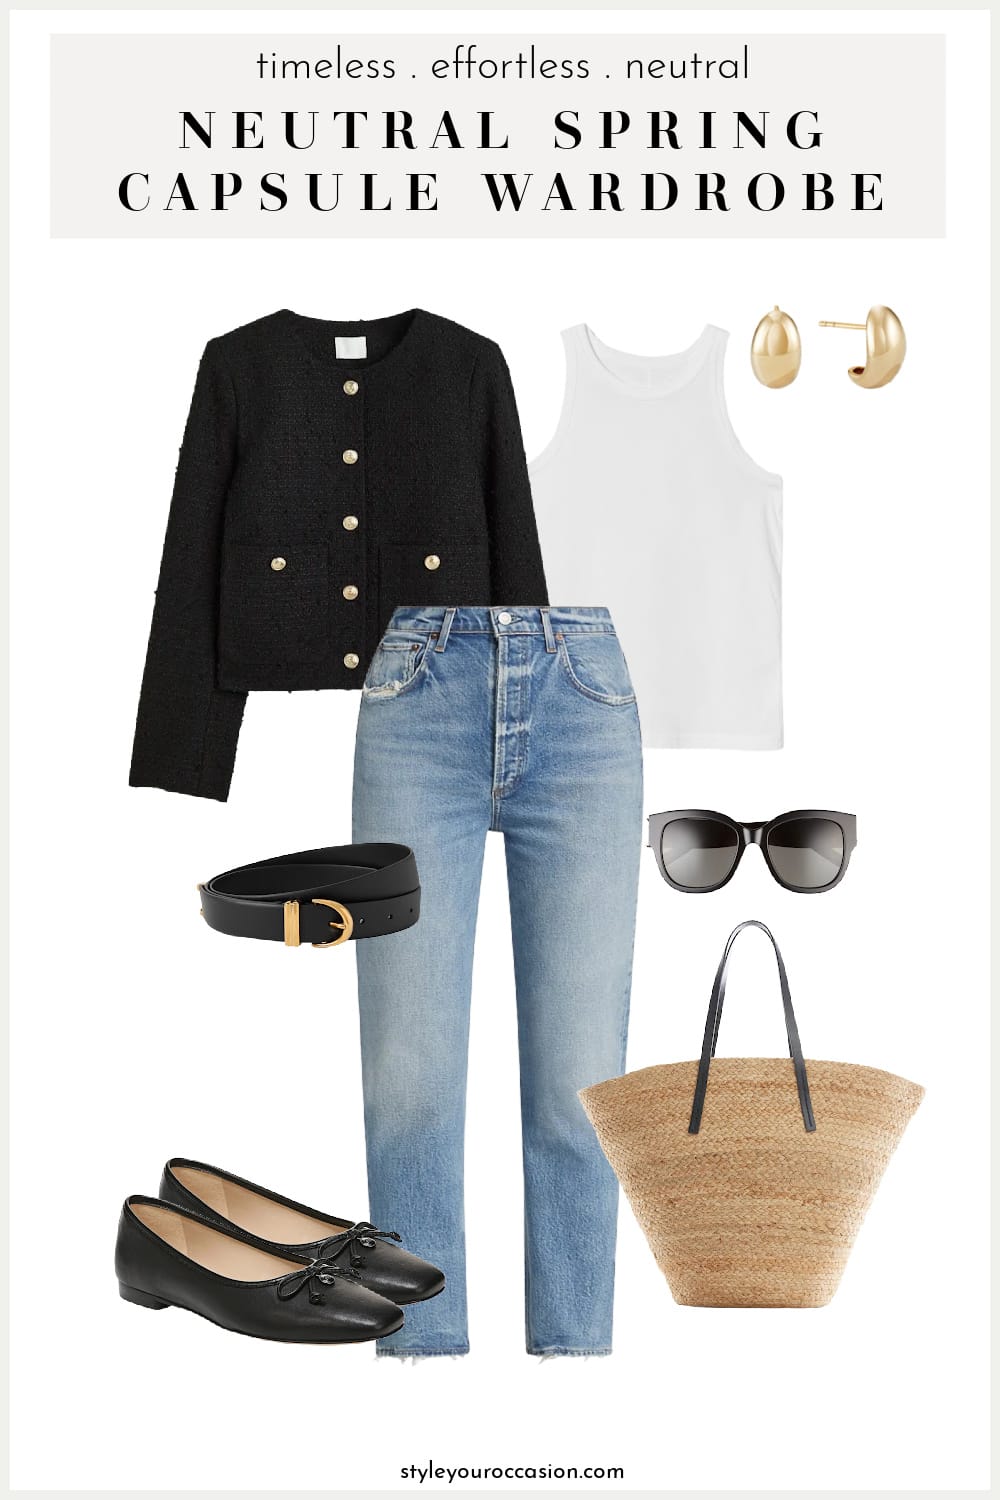 outfit image of a cropped black tweed jacket, white tank, blue jeans, and black ballet flats